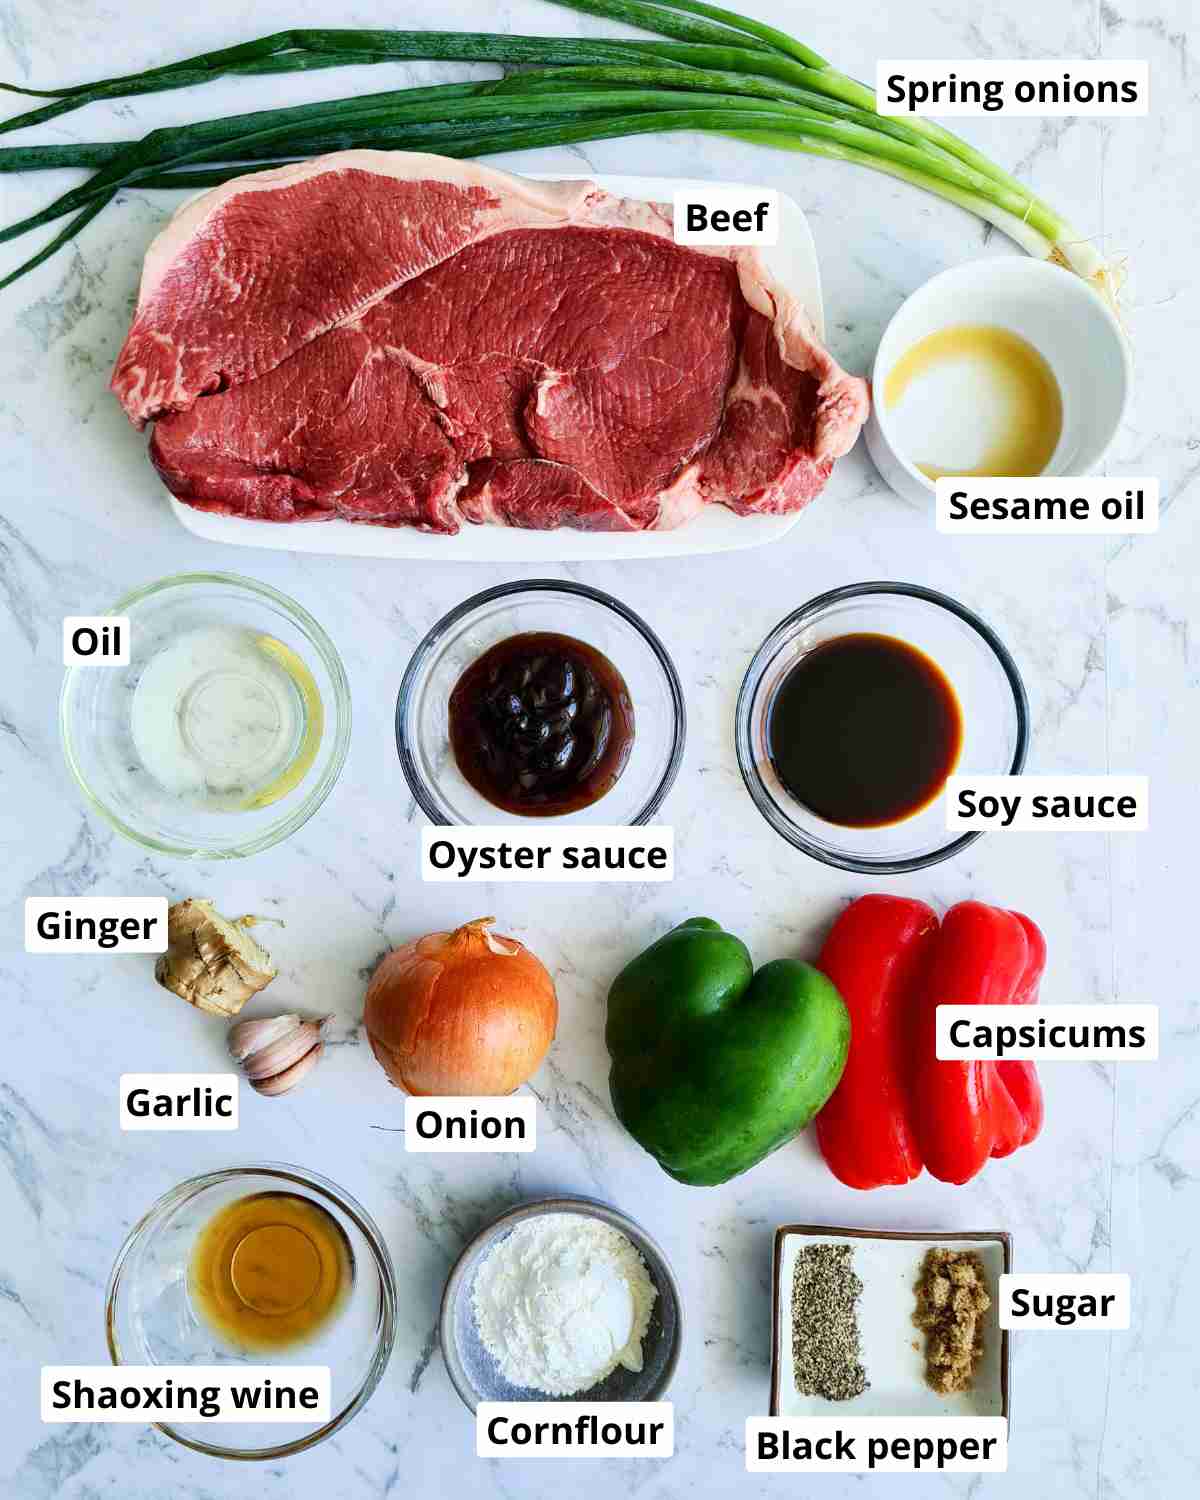 ingredients required to make a pepper beef stir fry recipe, labeled